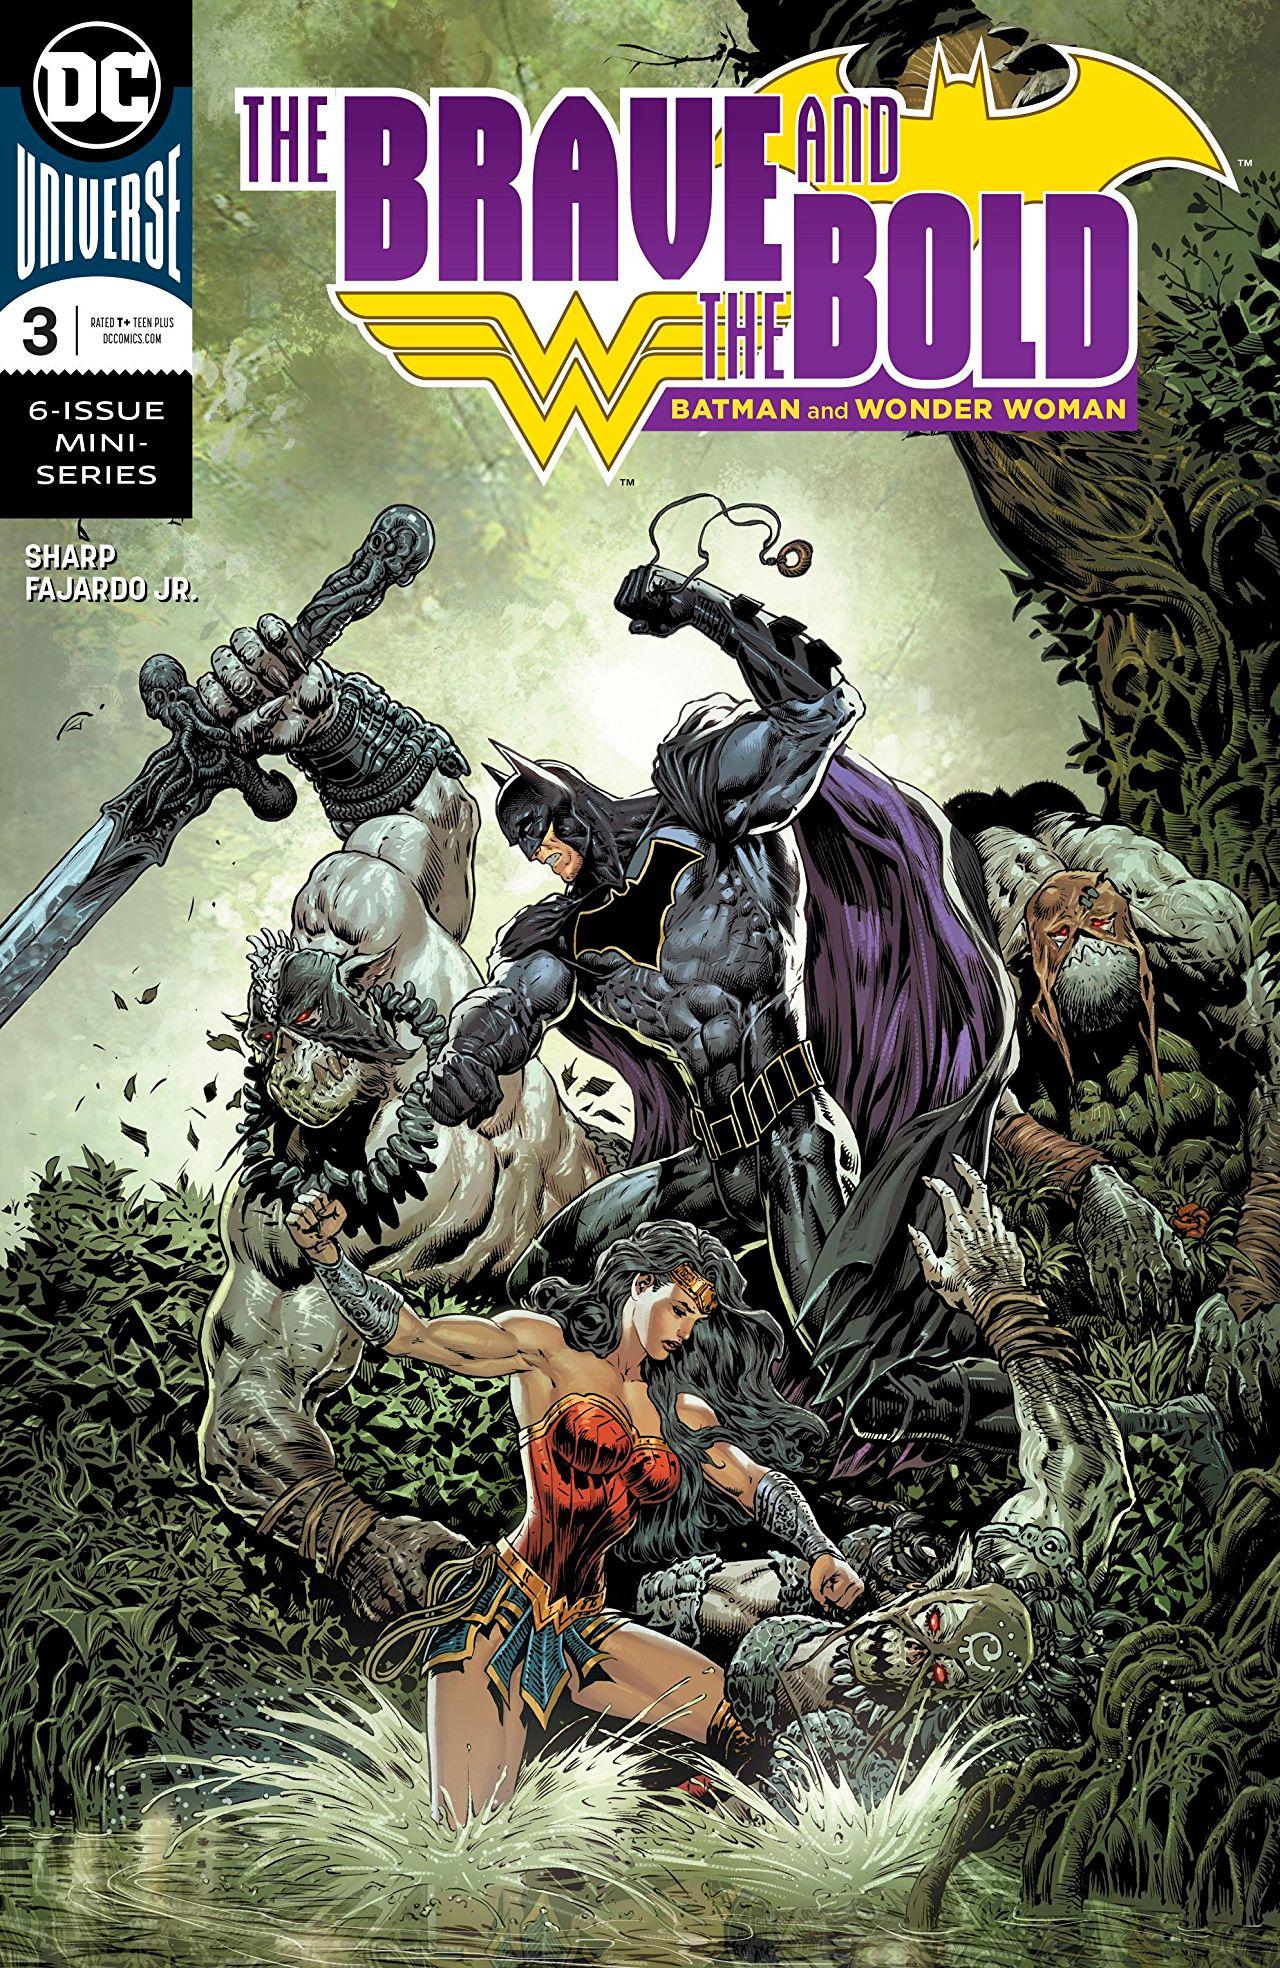 The Brave and the Bold: Batman and Wonder Woman Vol. 1 #3